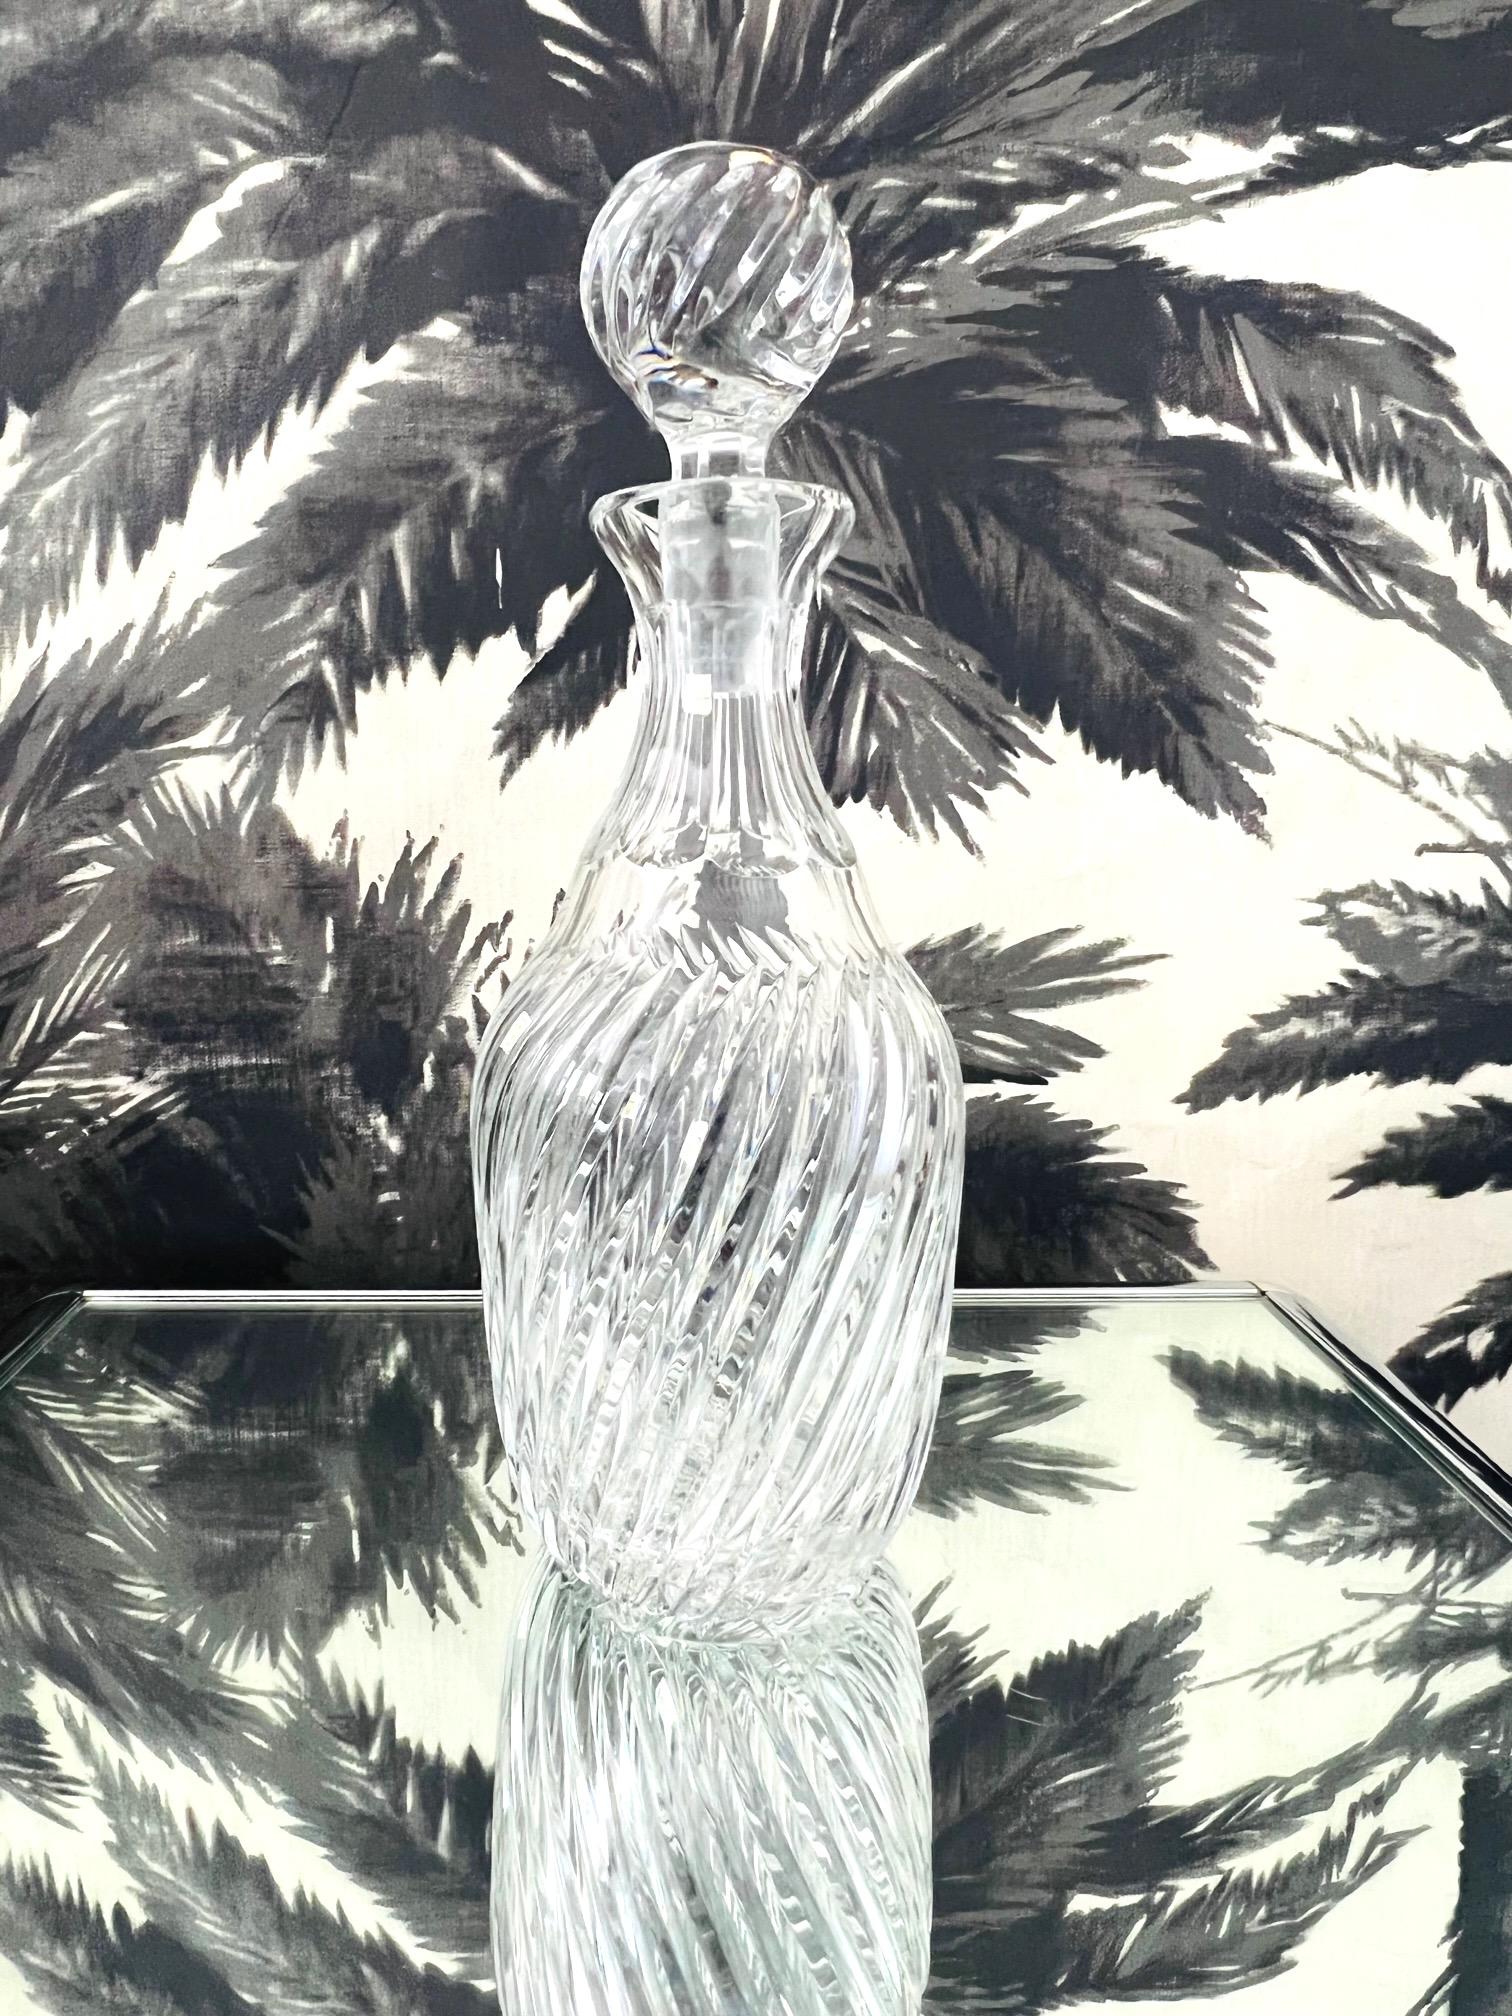 1970's blown glass decanter from France with matching round stopper. The stylized bottle has a tapered stem with faceted accents and has a bulbous base. It features elegant hand-cut swirls on a bias with a starburst etched base. Makes a chic